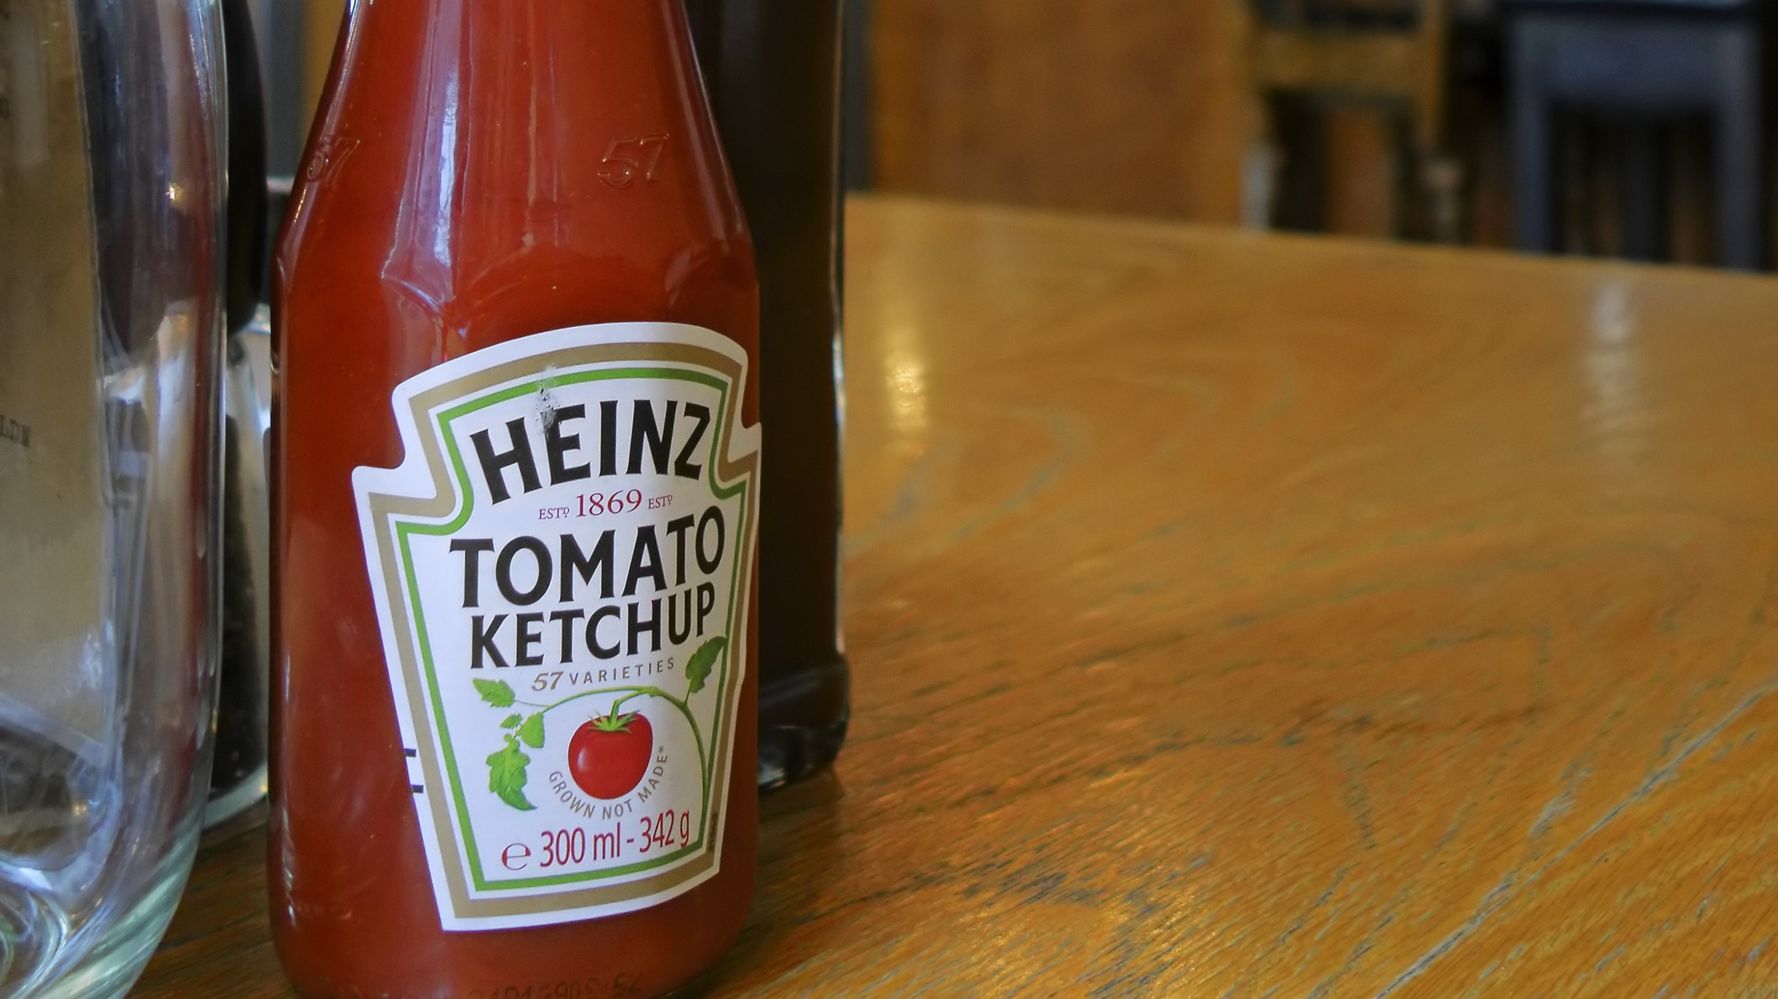 This Life Hack Will Help You Get Heinz Tomato Ketchup Out Of The Bottle